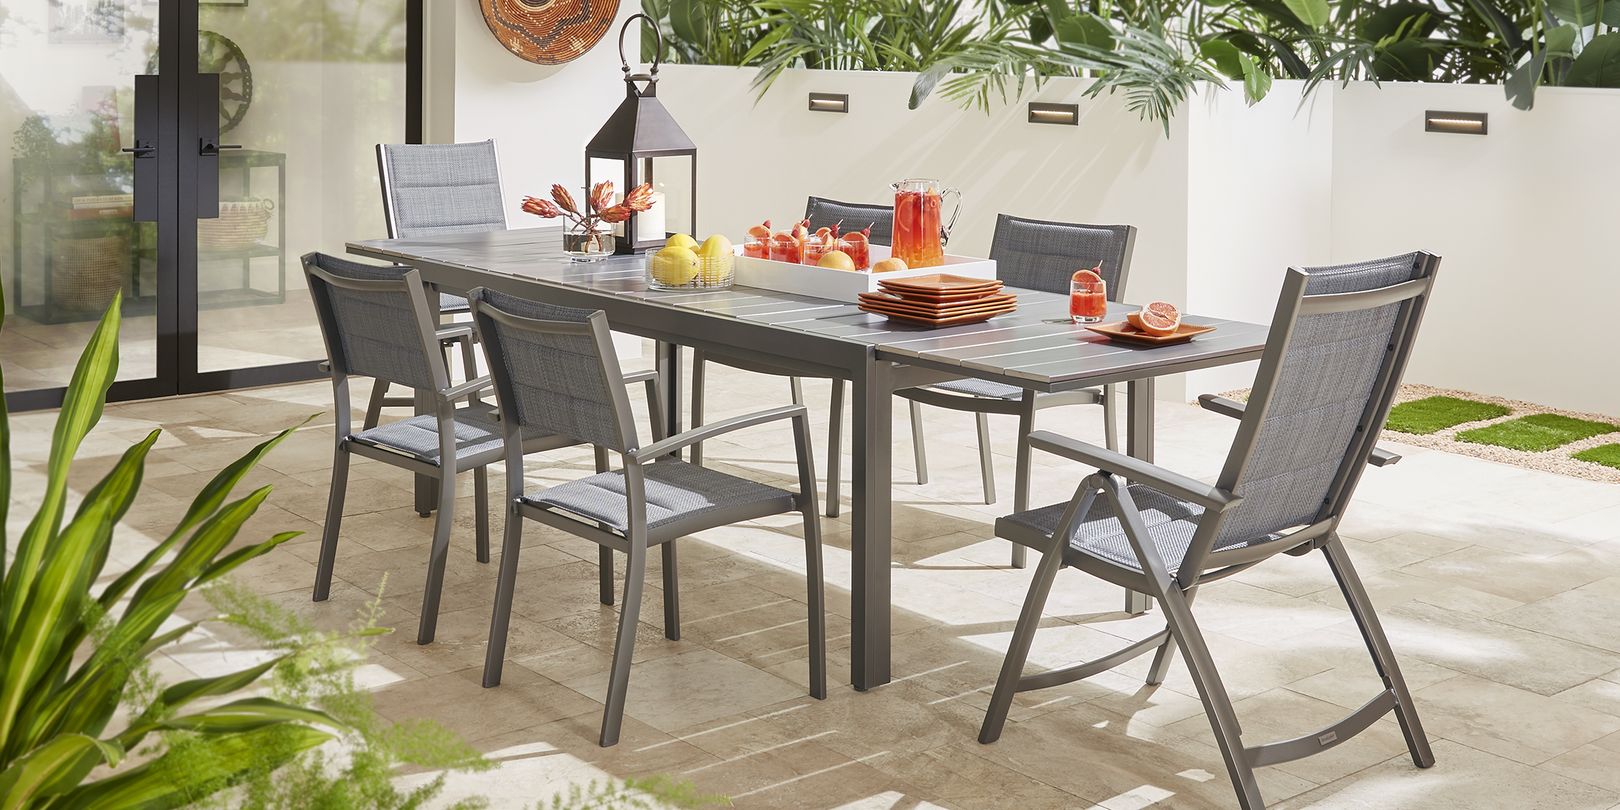 photo of a gray metal extension table and chairs